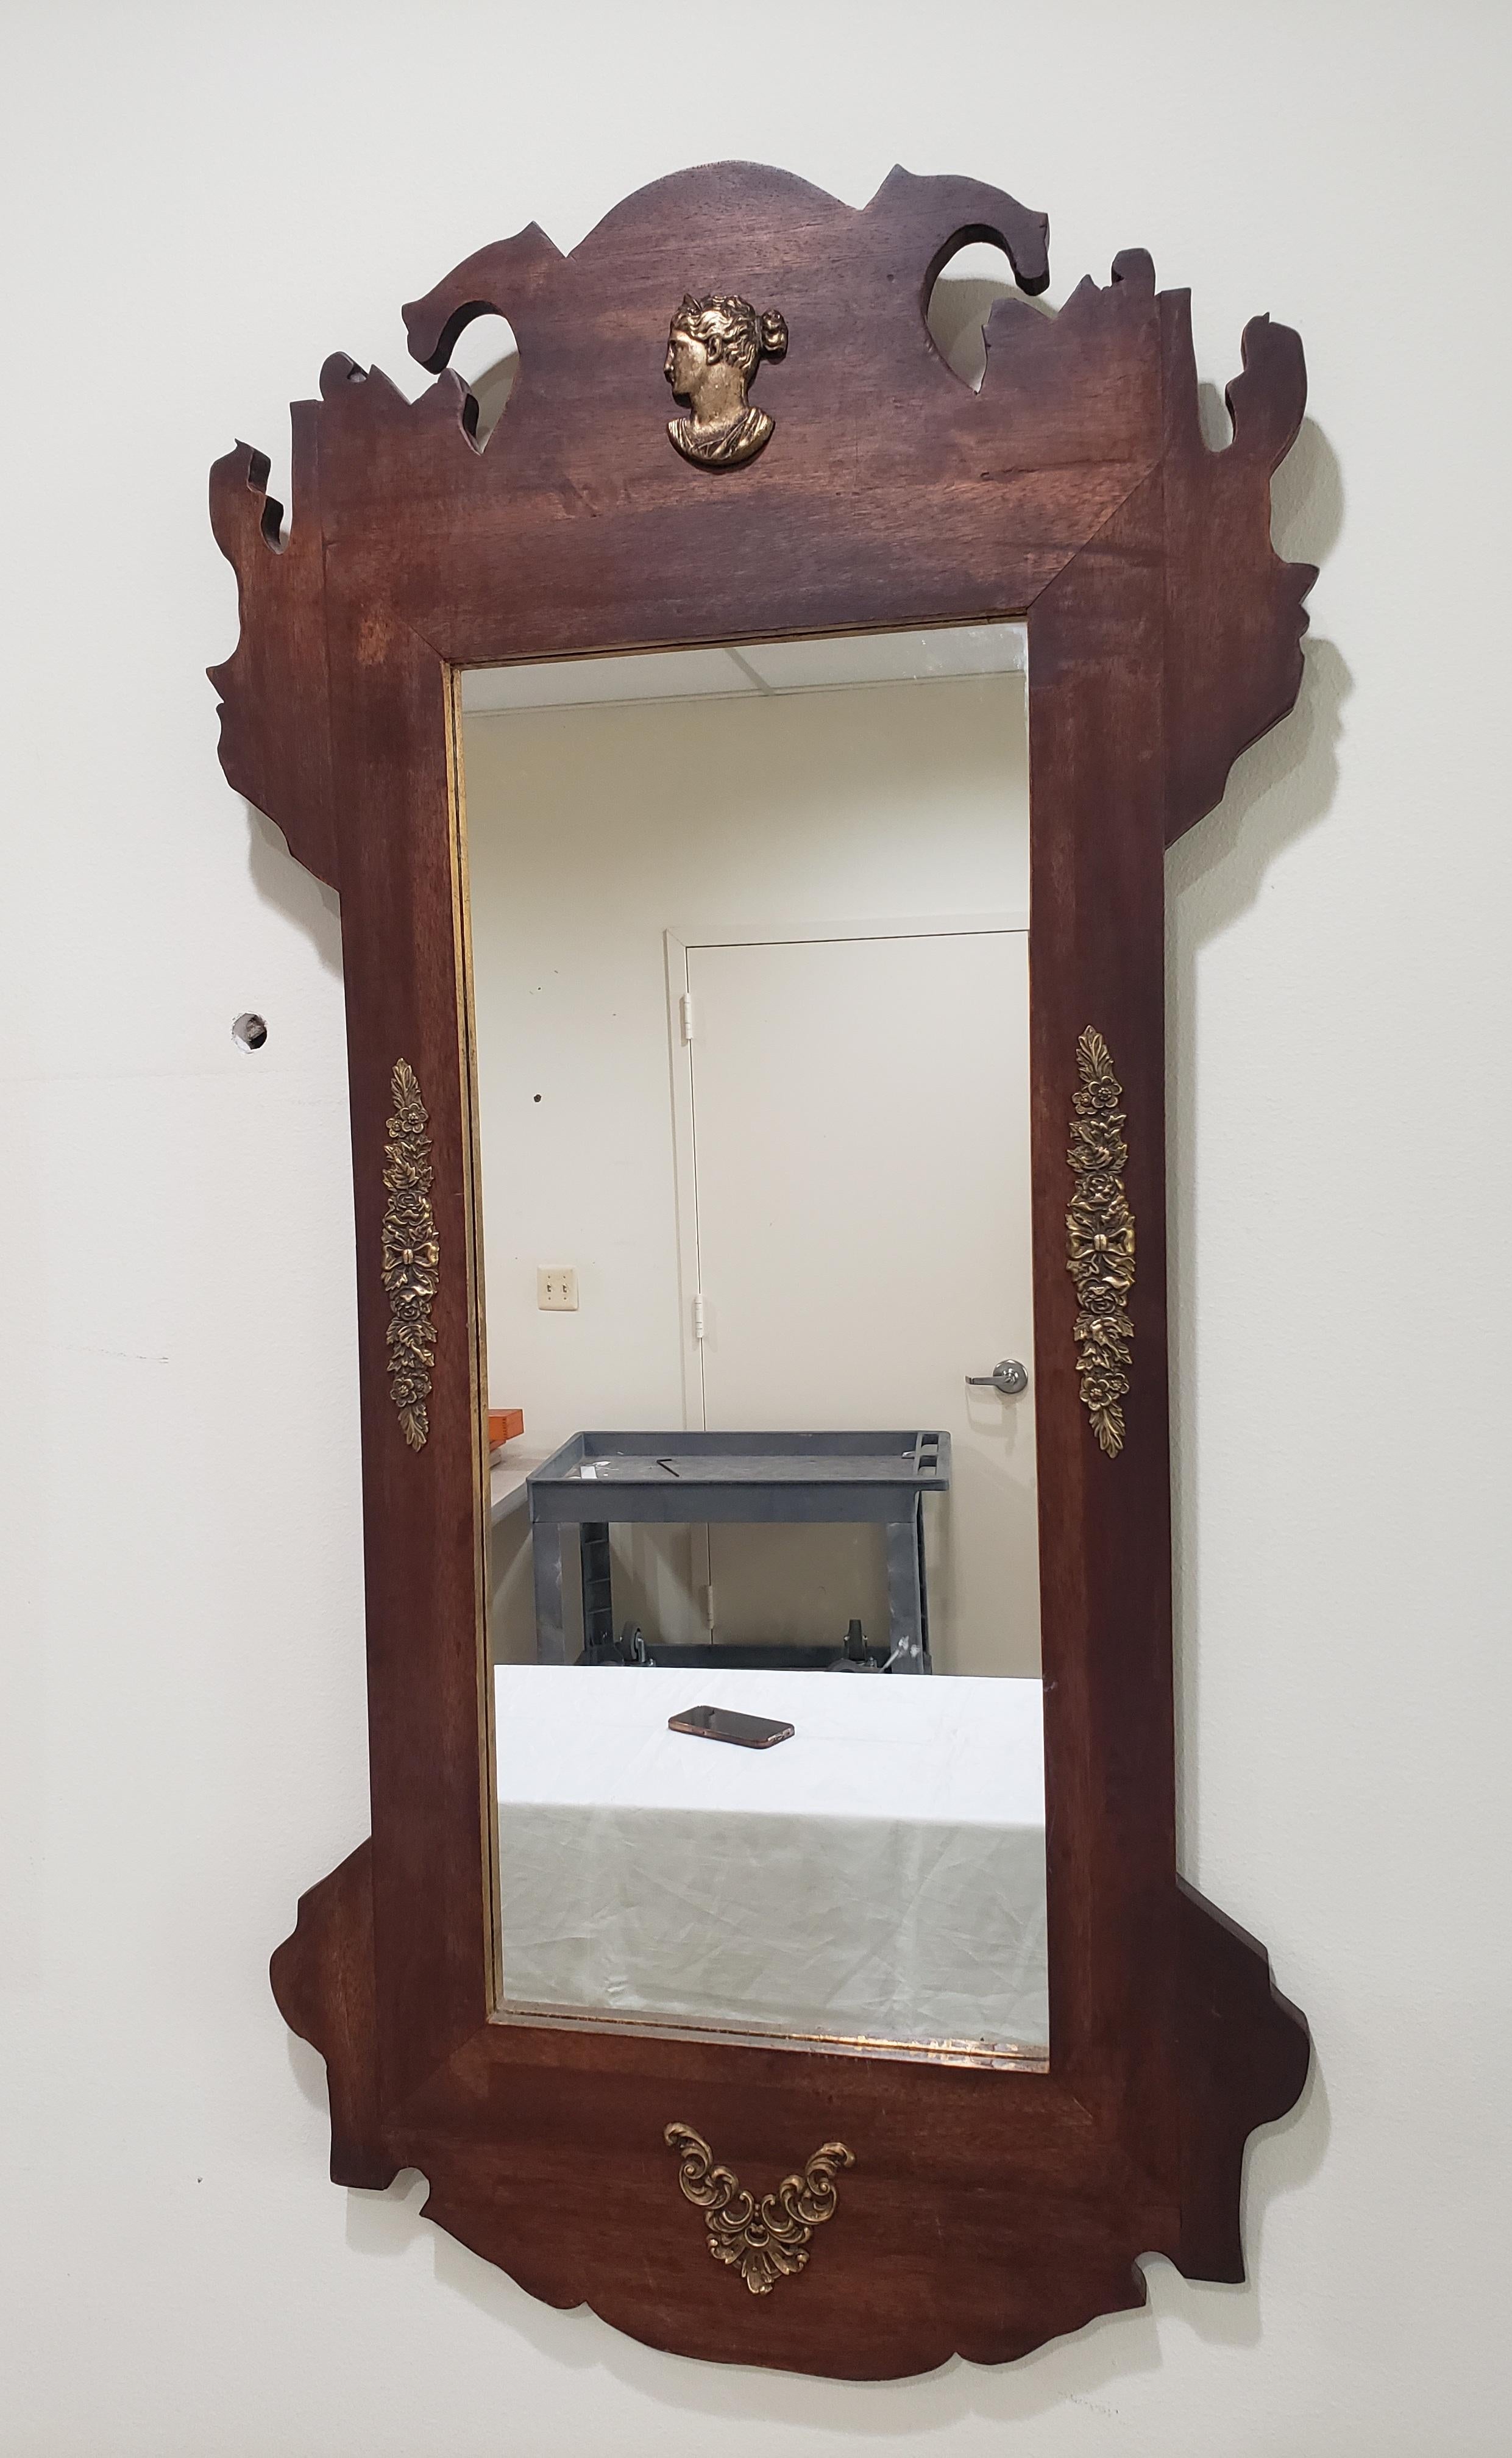 An Early 20th C Neoclassical Bronze Mounted and Partial Gilt Mahogany Scroll-Ear Mirror in good condition. Solid Mahogany frame. Measures 20.5